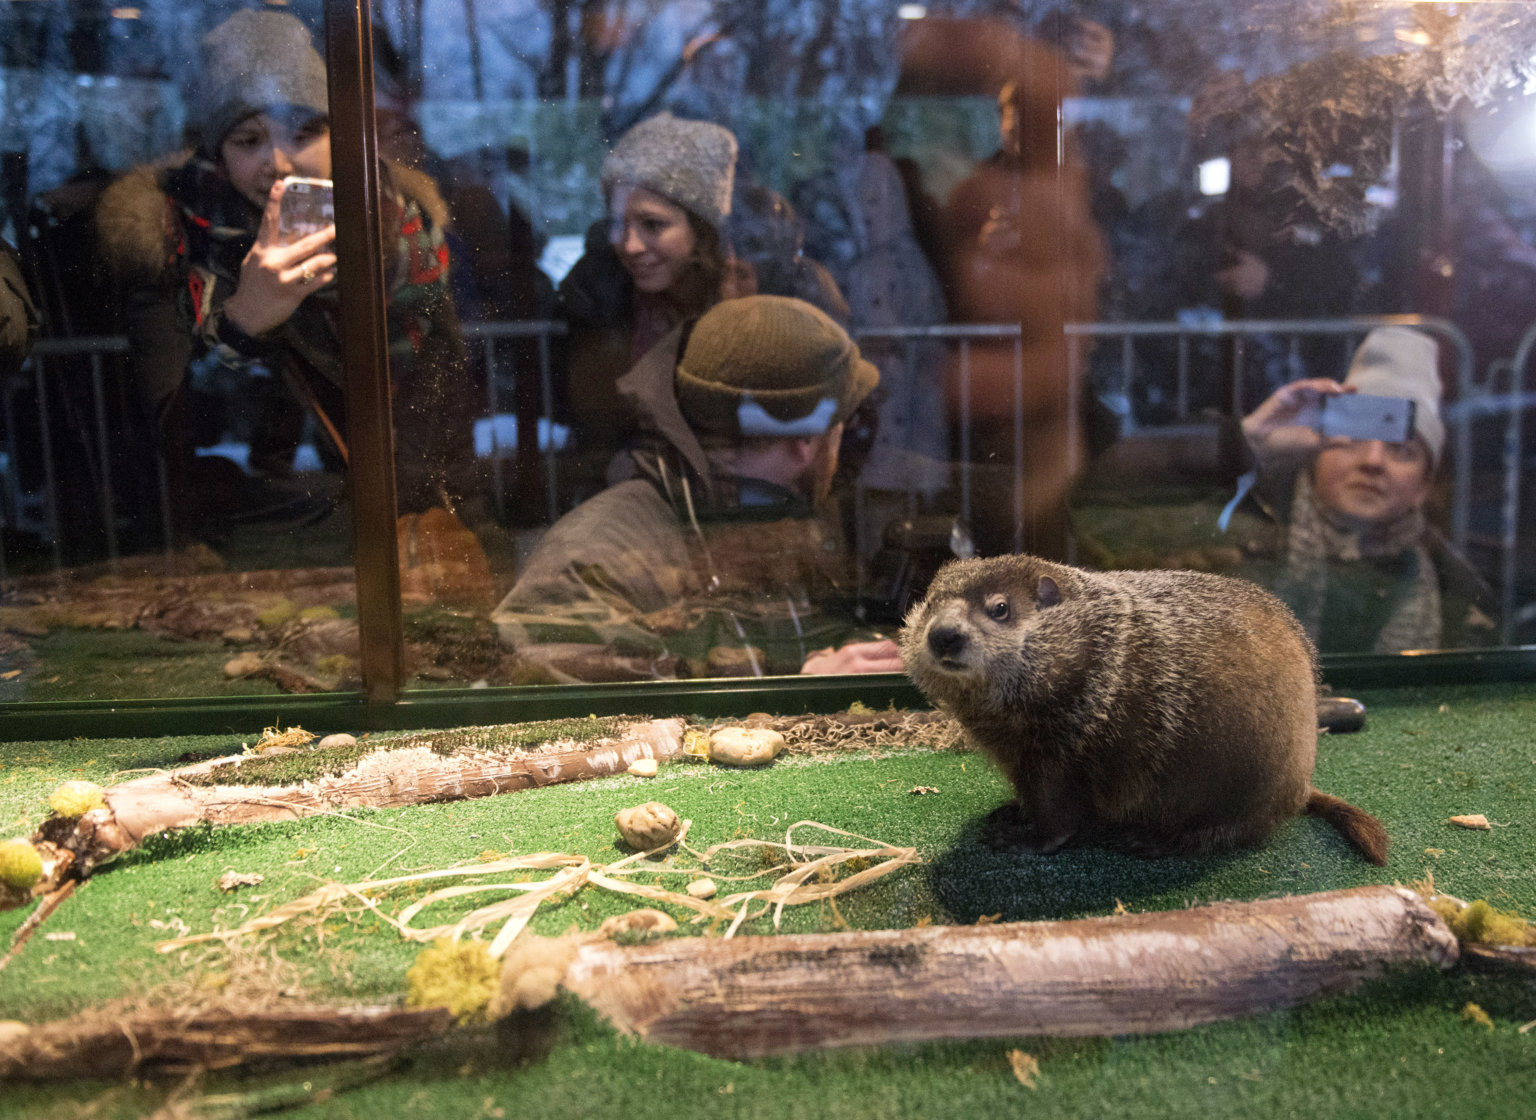 Staten Island Chuck to make prediction in virtual event on Groundhog